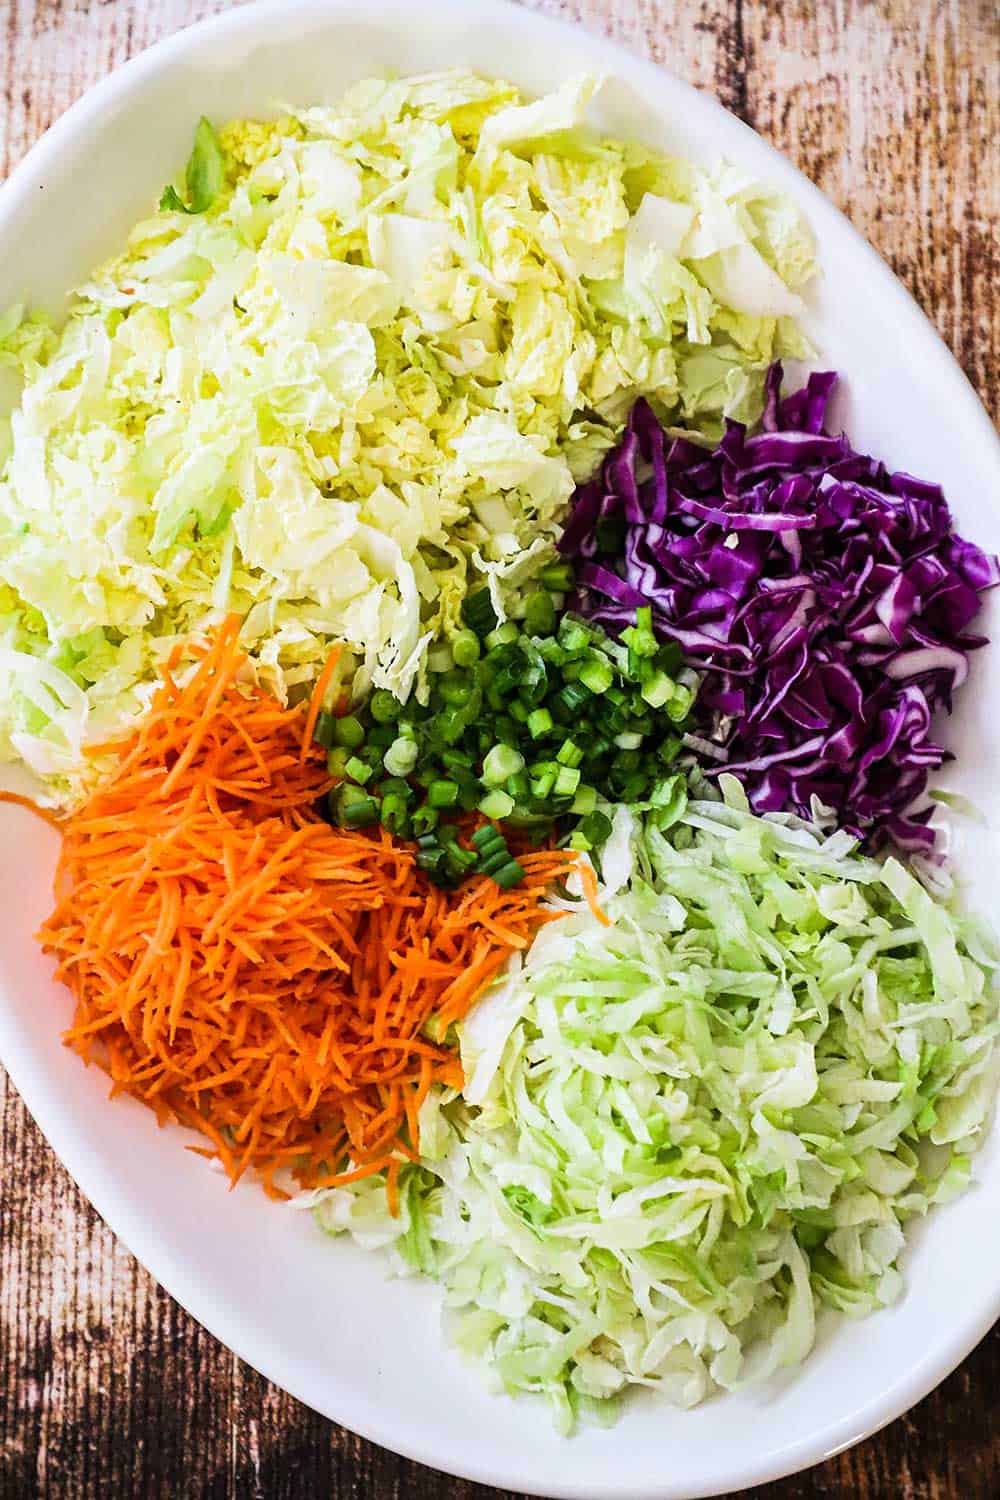 A large white oval platter filled with chopped green and red cabbage, iceberg lettuce, and shredded carrots. 